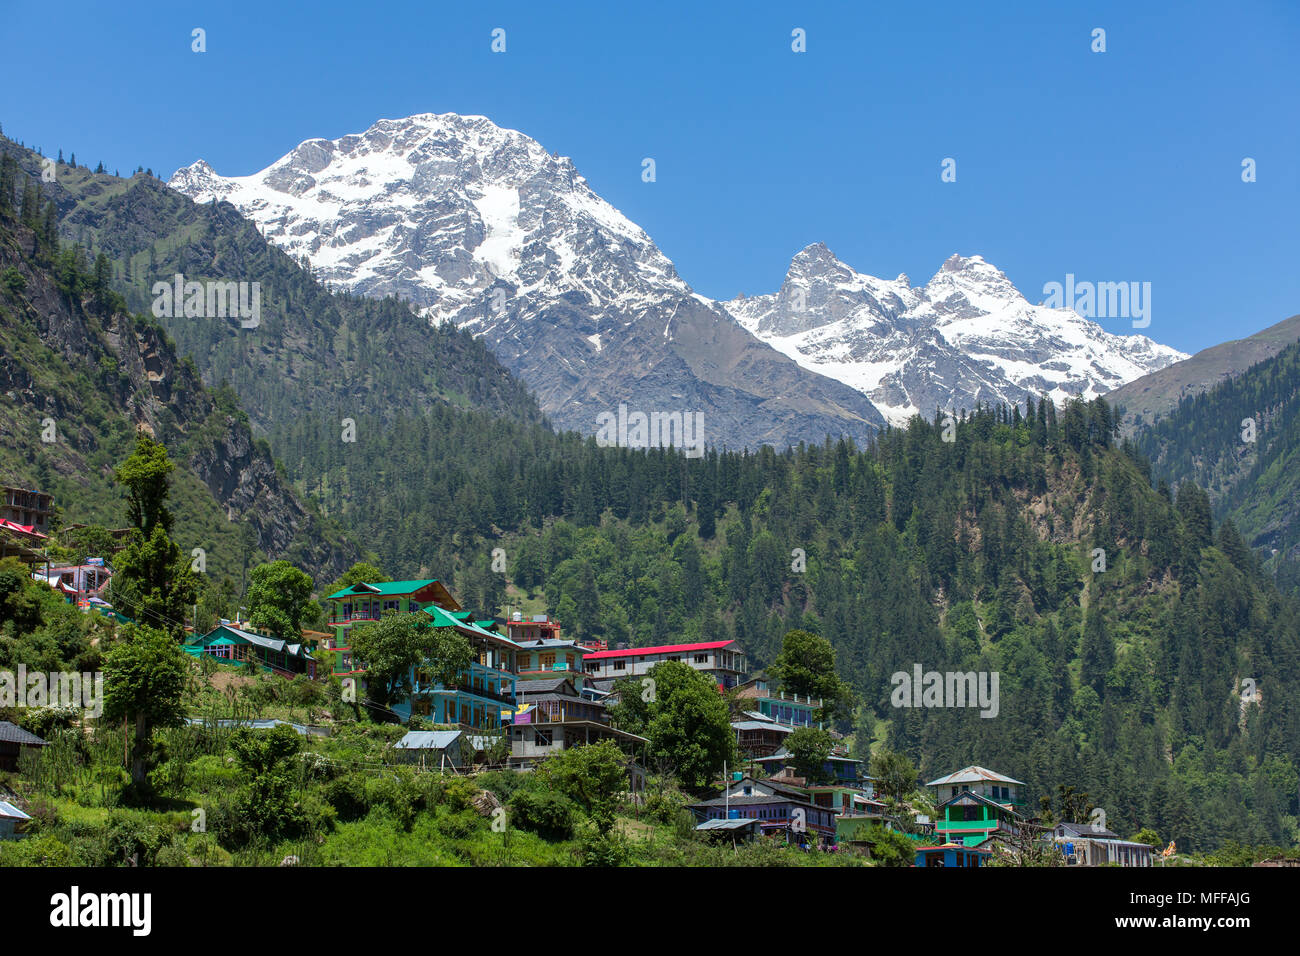 Tosh village in beautiful Parvati valley in Himachal Pradesh state, Northern India Stock Photo